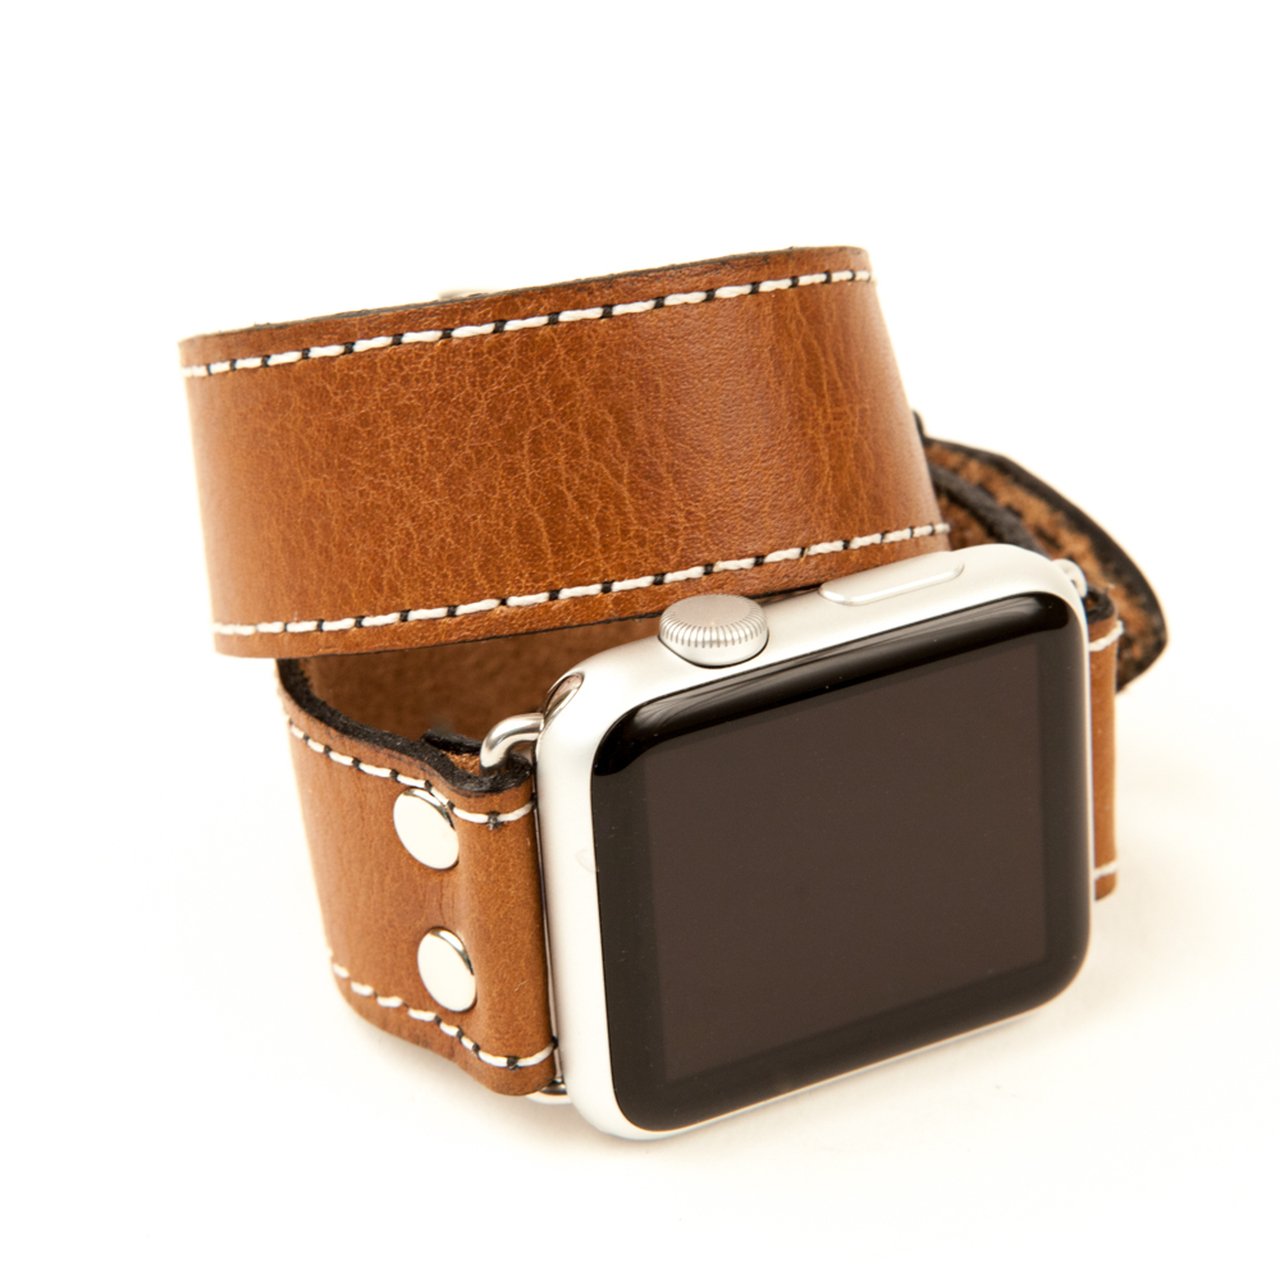 Our double wrap Apple watch band is the perfect addition to any watch collection.    